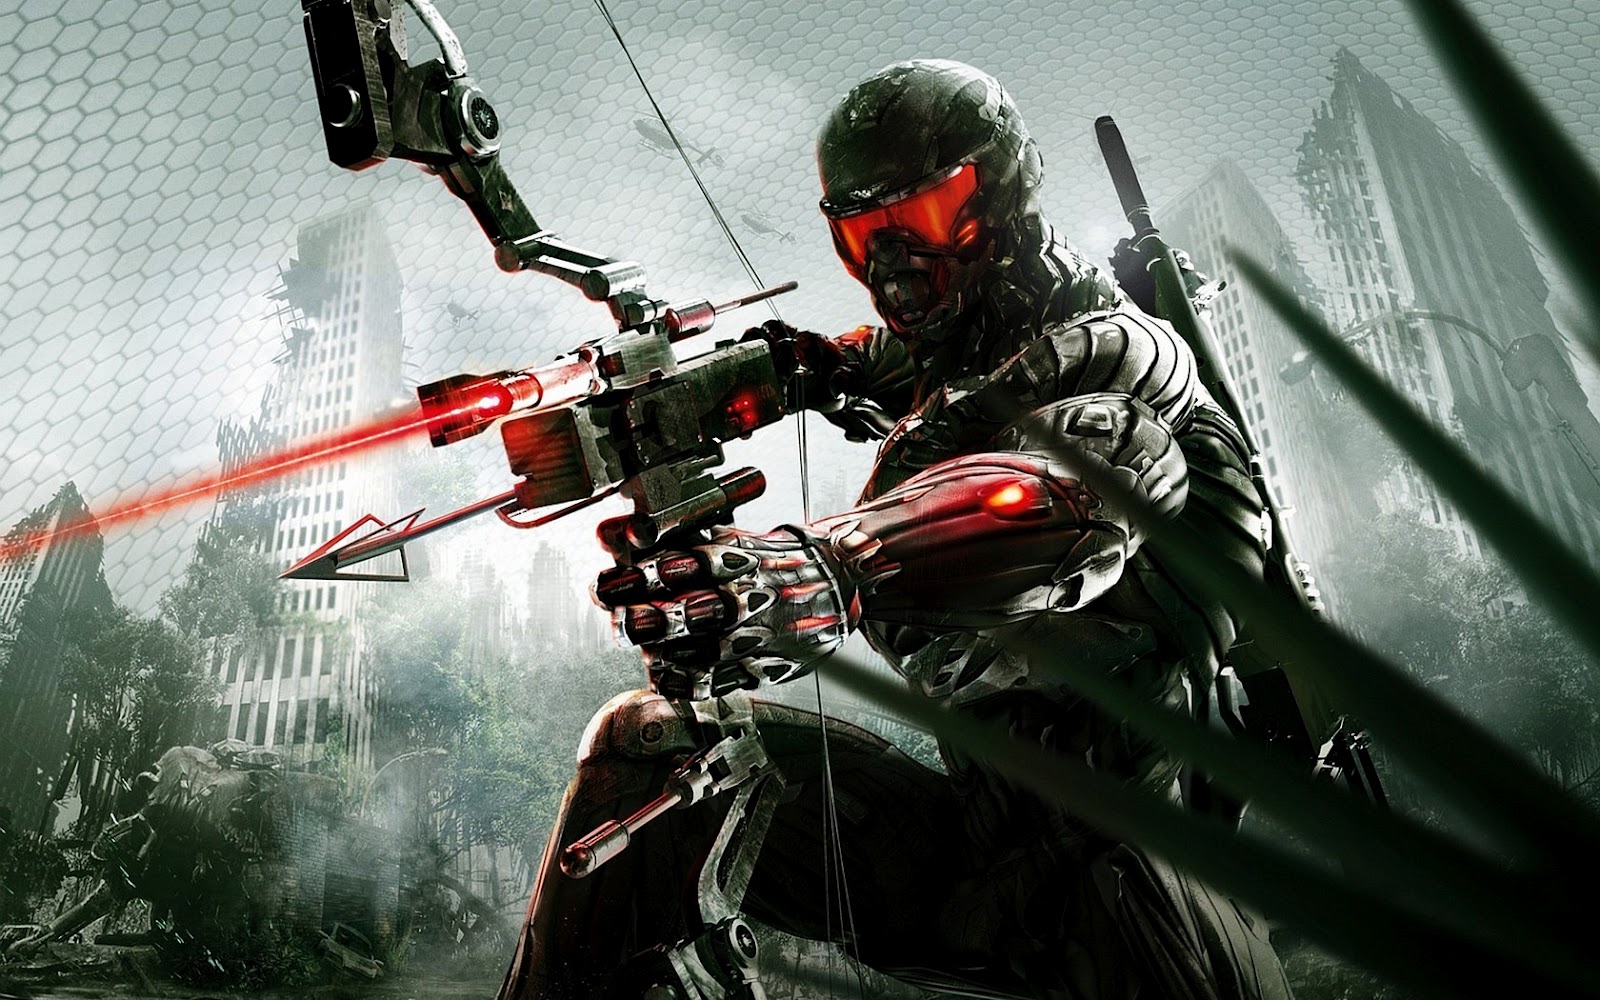 Crysis 3 New Game HD Wallpapers and Dvd Cover Download Free Wallpapers